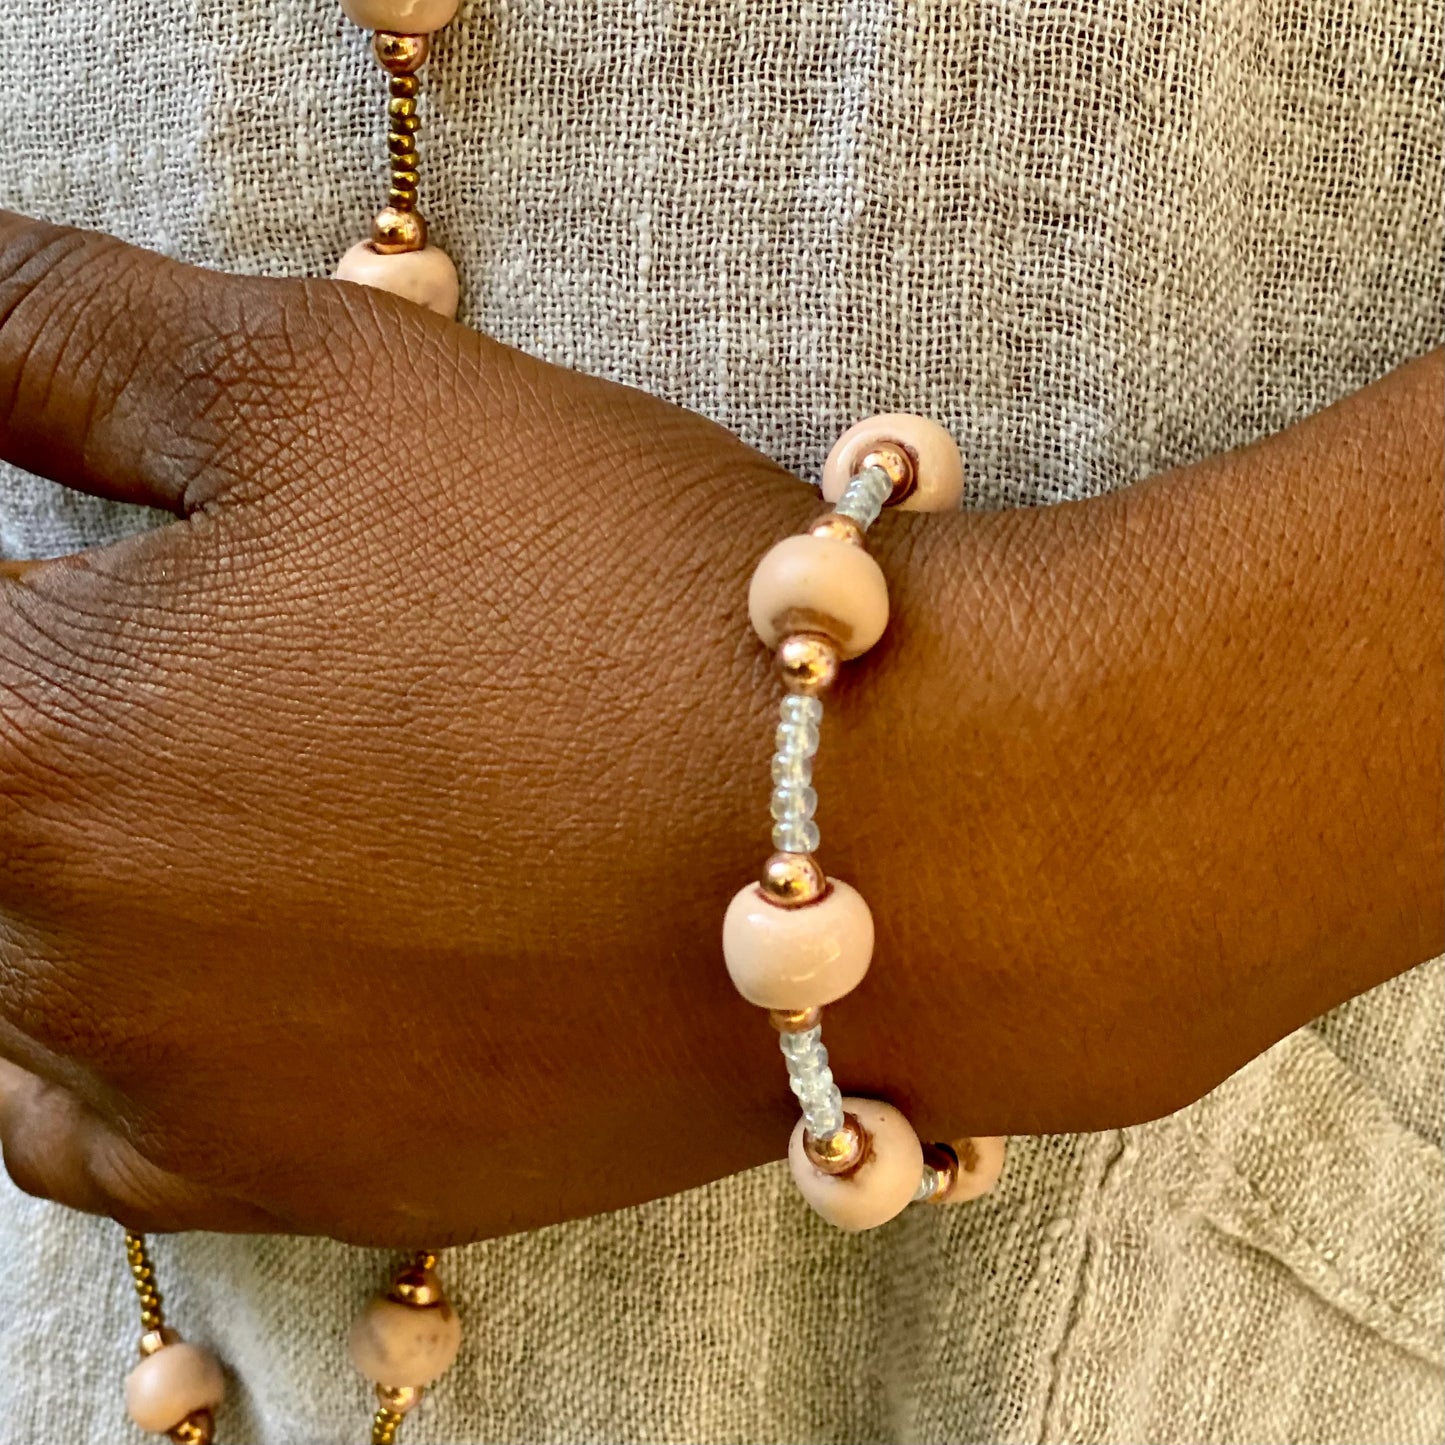 A sweet classic piece with subtle ceramic beads in loving memory of Marise and her baby. The ceramic beads represent Marise and the work she did making beads. The rose gold beads represent her baby who went to Heaven with her. The white seed beads represent the five children she left behind. 